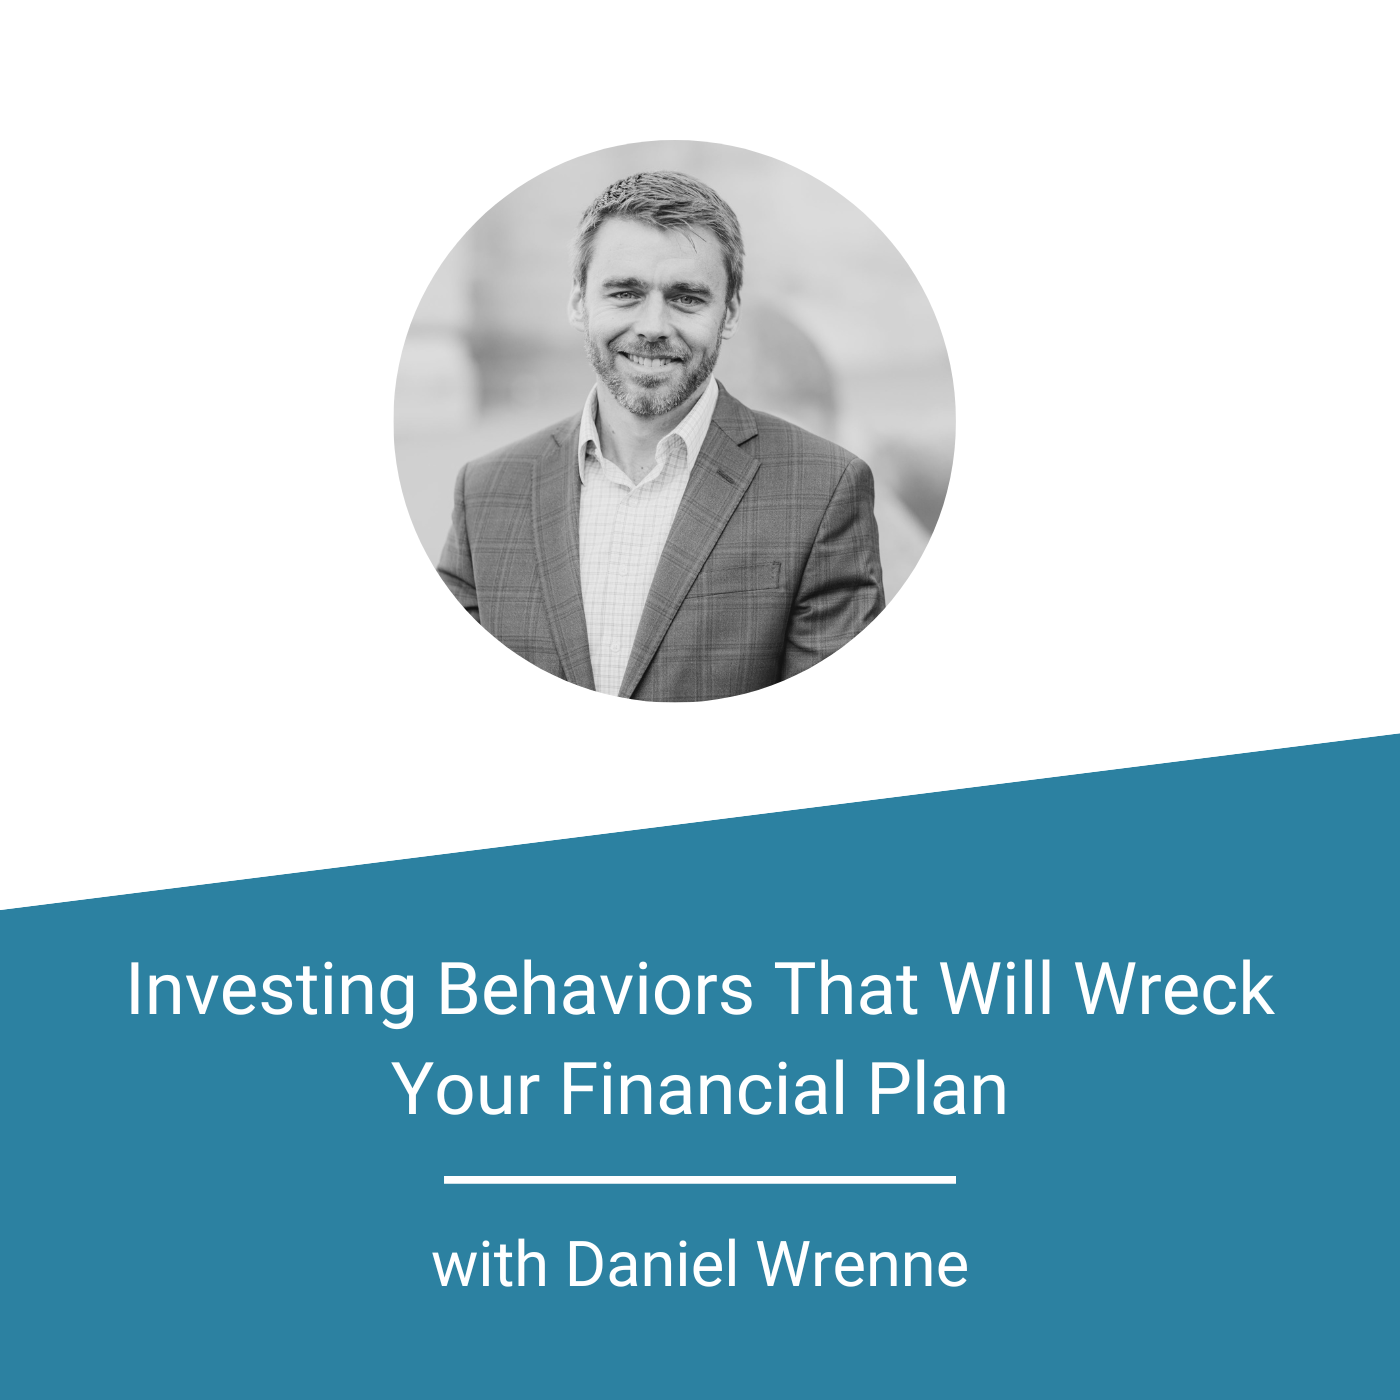 Investing Behaviors That Will Wreck Your Financial Plan